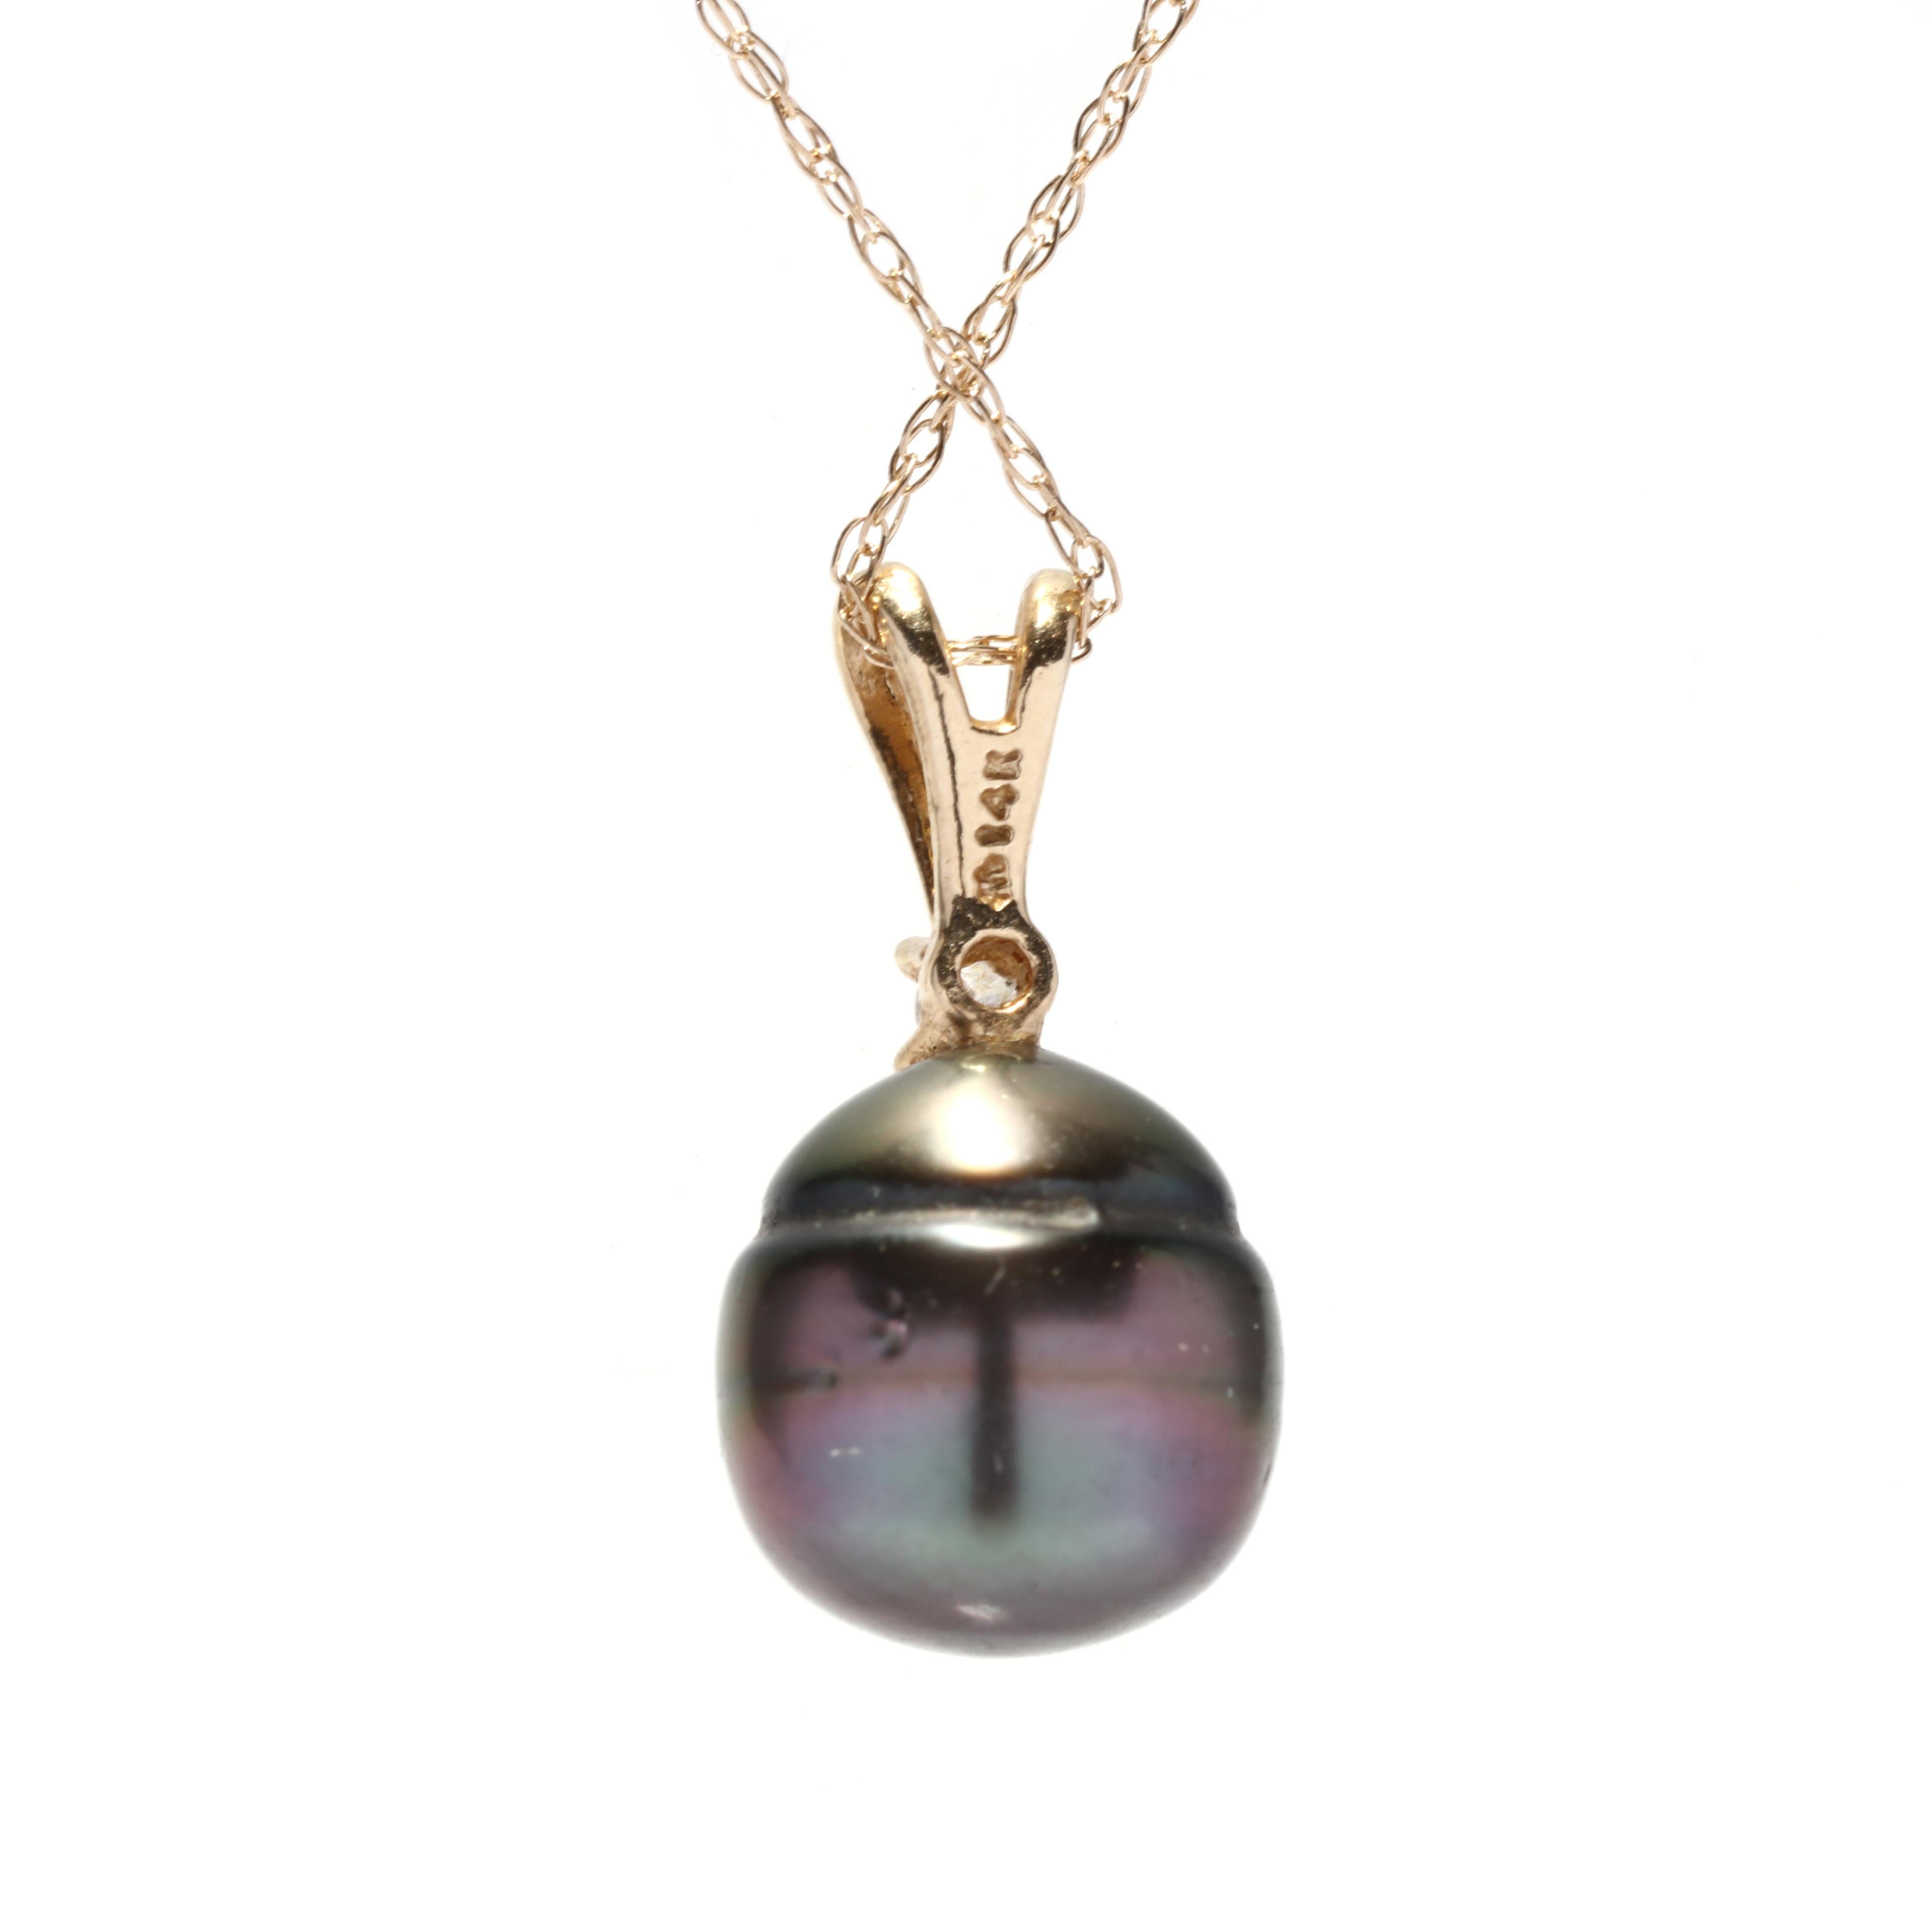 A 10 karat yellow gold Tahitian pearl and diamond pendant necklace. This simple necklace features a oval bead shape Tahitian pearl set below a round brilliant cut diamond weighing approximately .02 carat and suspended from a thin rope